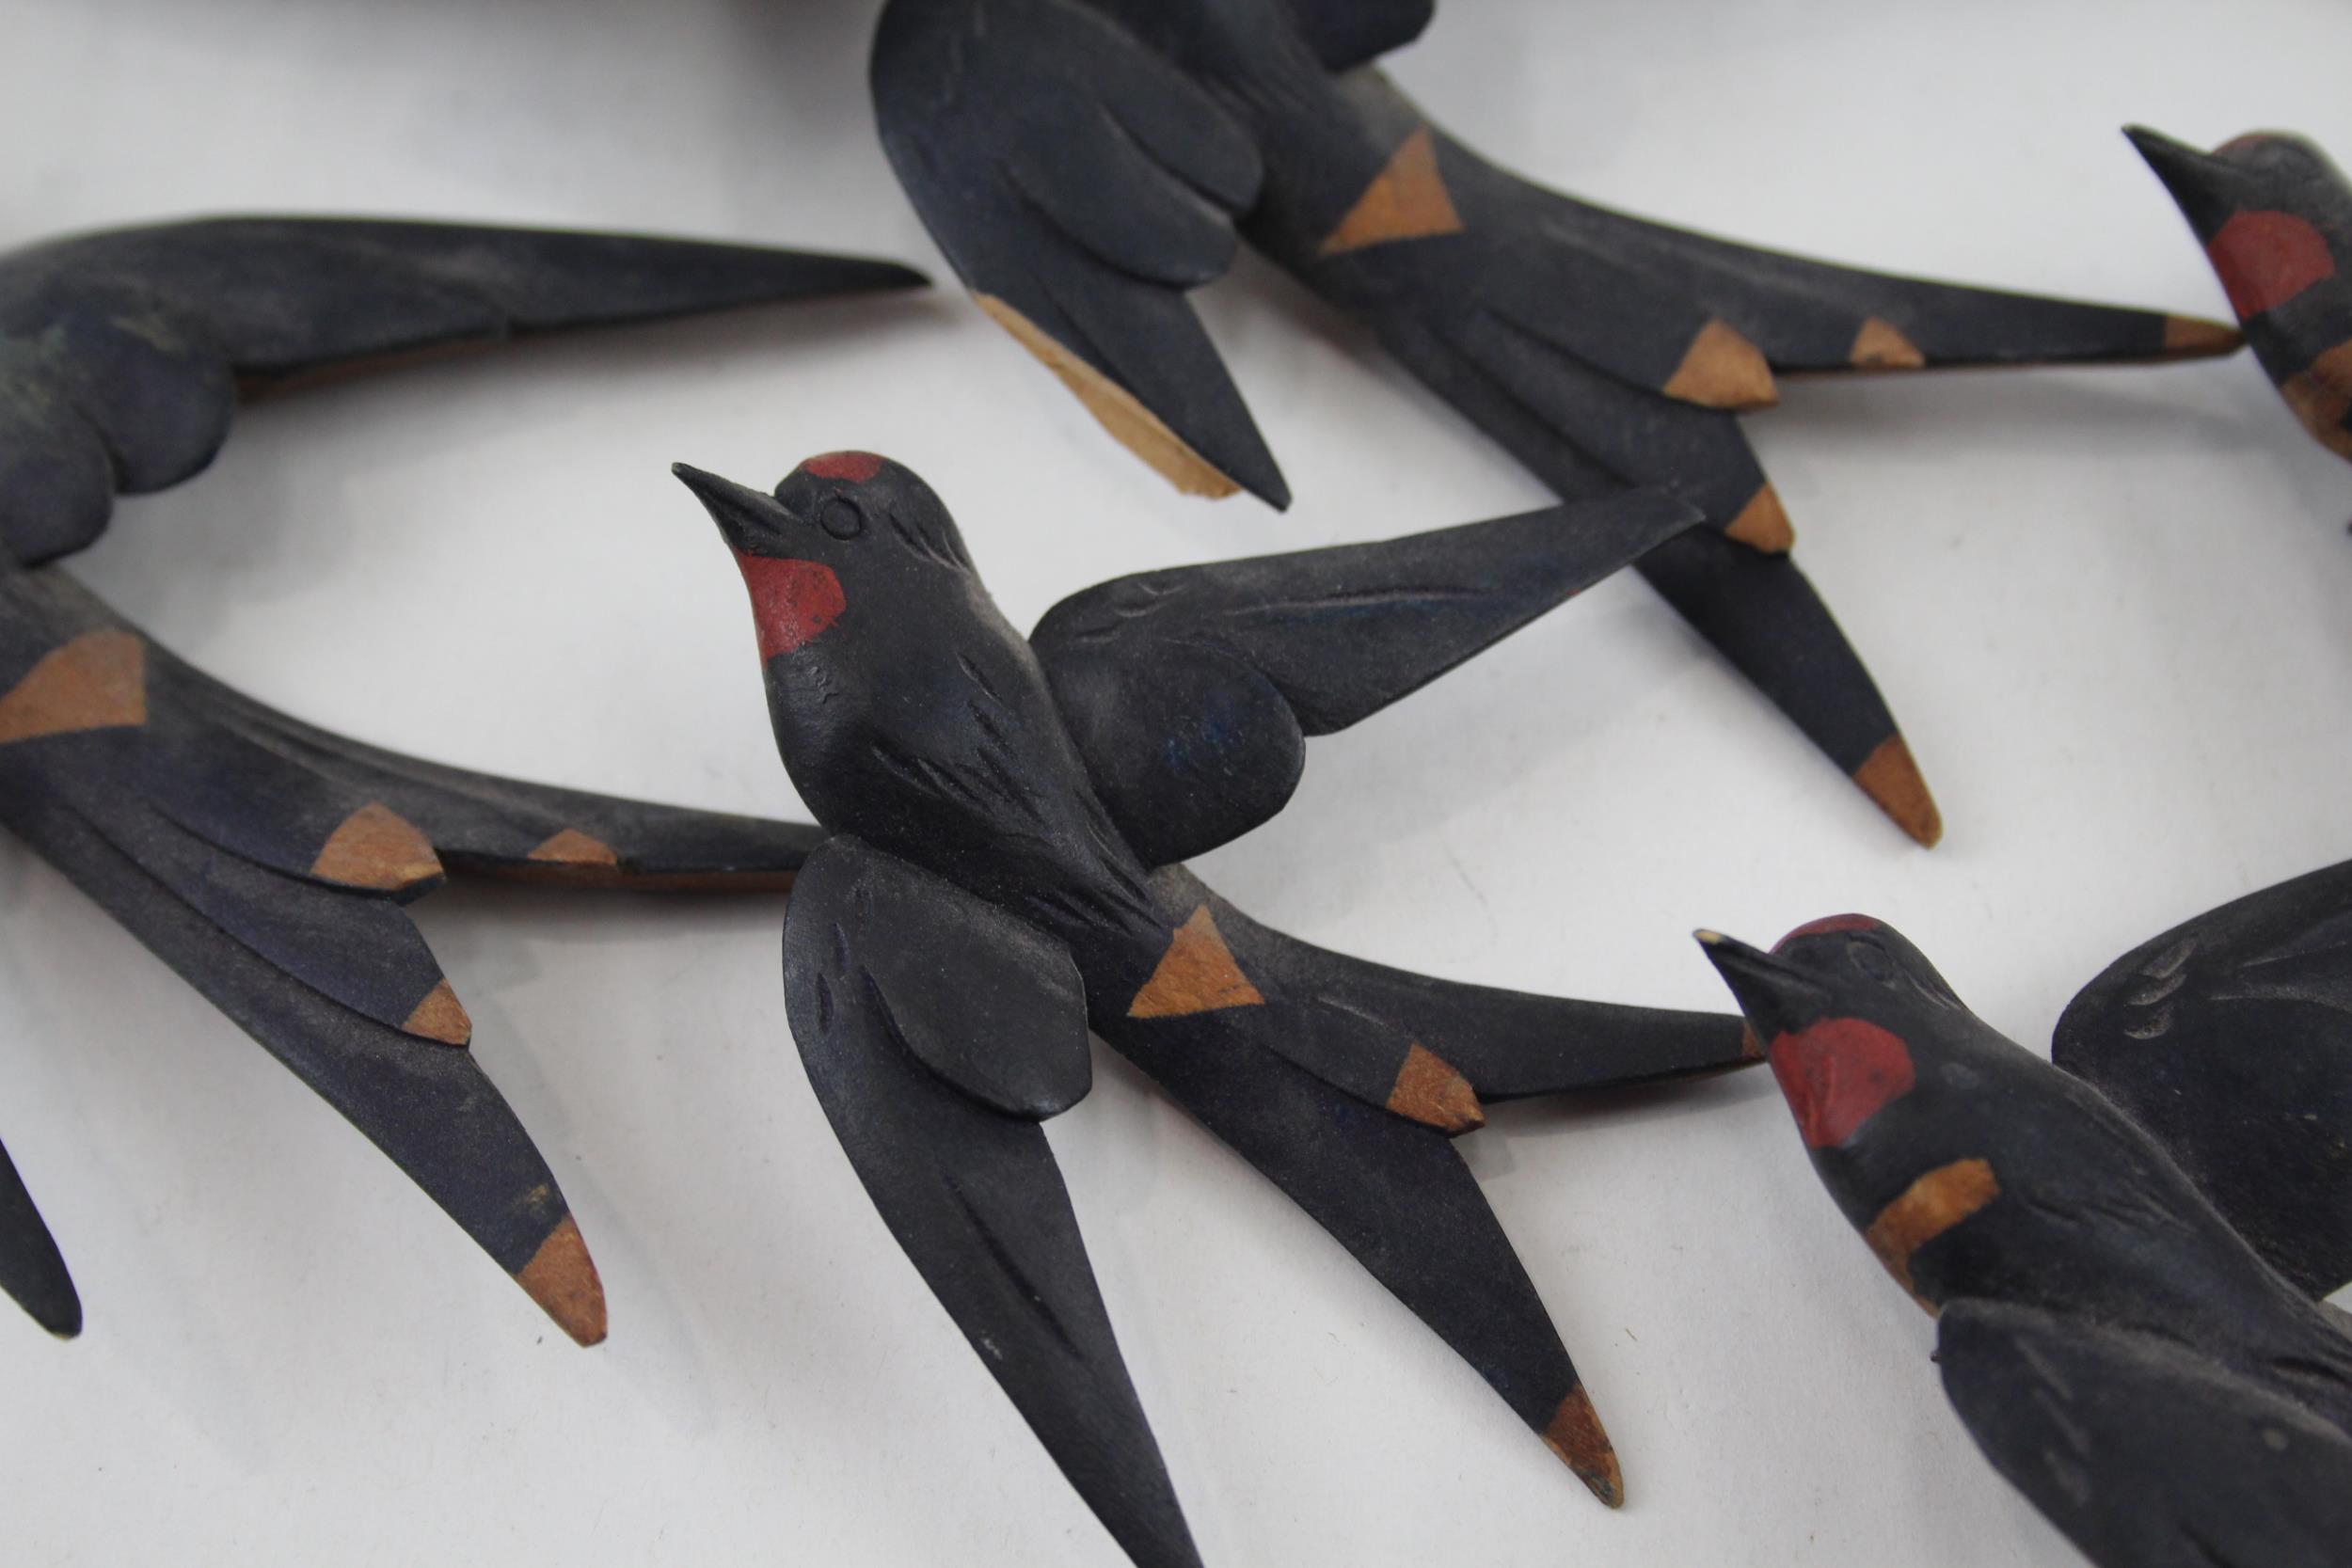 7 x Antique Hand Carded African Wooden Birds In Flight Wall Decorations - Diameter of Largest - 14cm - Image 6 of 9